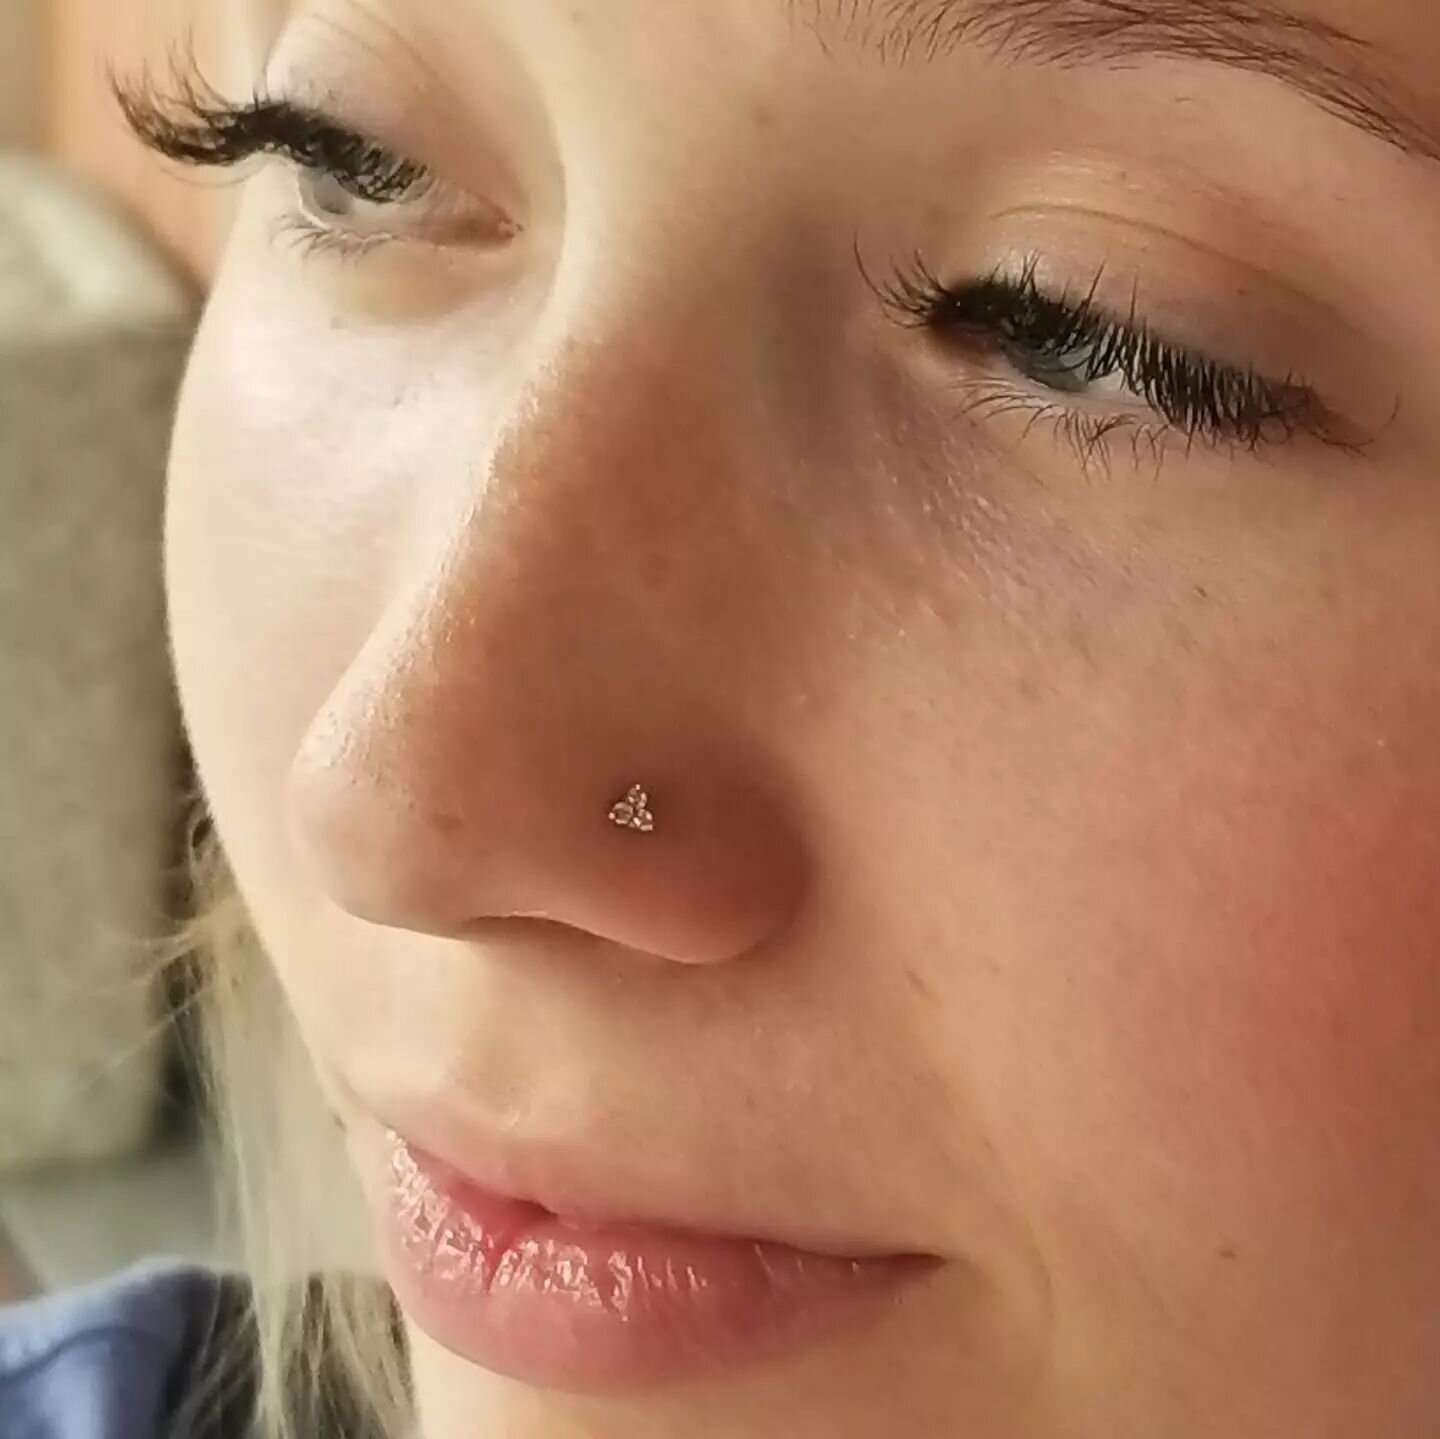 This 18kt gold/cz trinity from @anatometalinc is a perfect fit for this nostril piercing done by Robert @piercingsbyrobert 

#nostril #nosepiercing #nostrilpiercing #goldbodyjewelry #goldjewelry #bodyjewelry #bodypiercing #legitbodyjewelry #safepierc